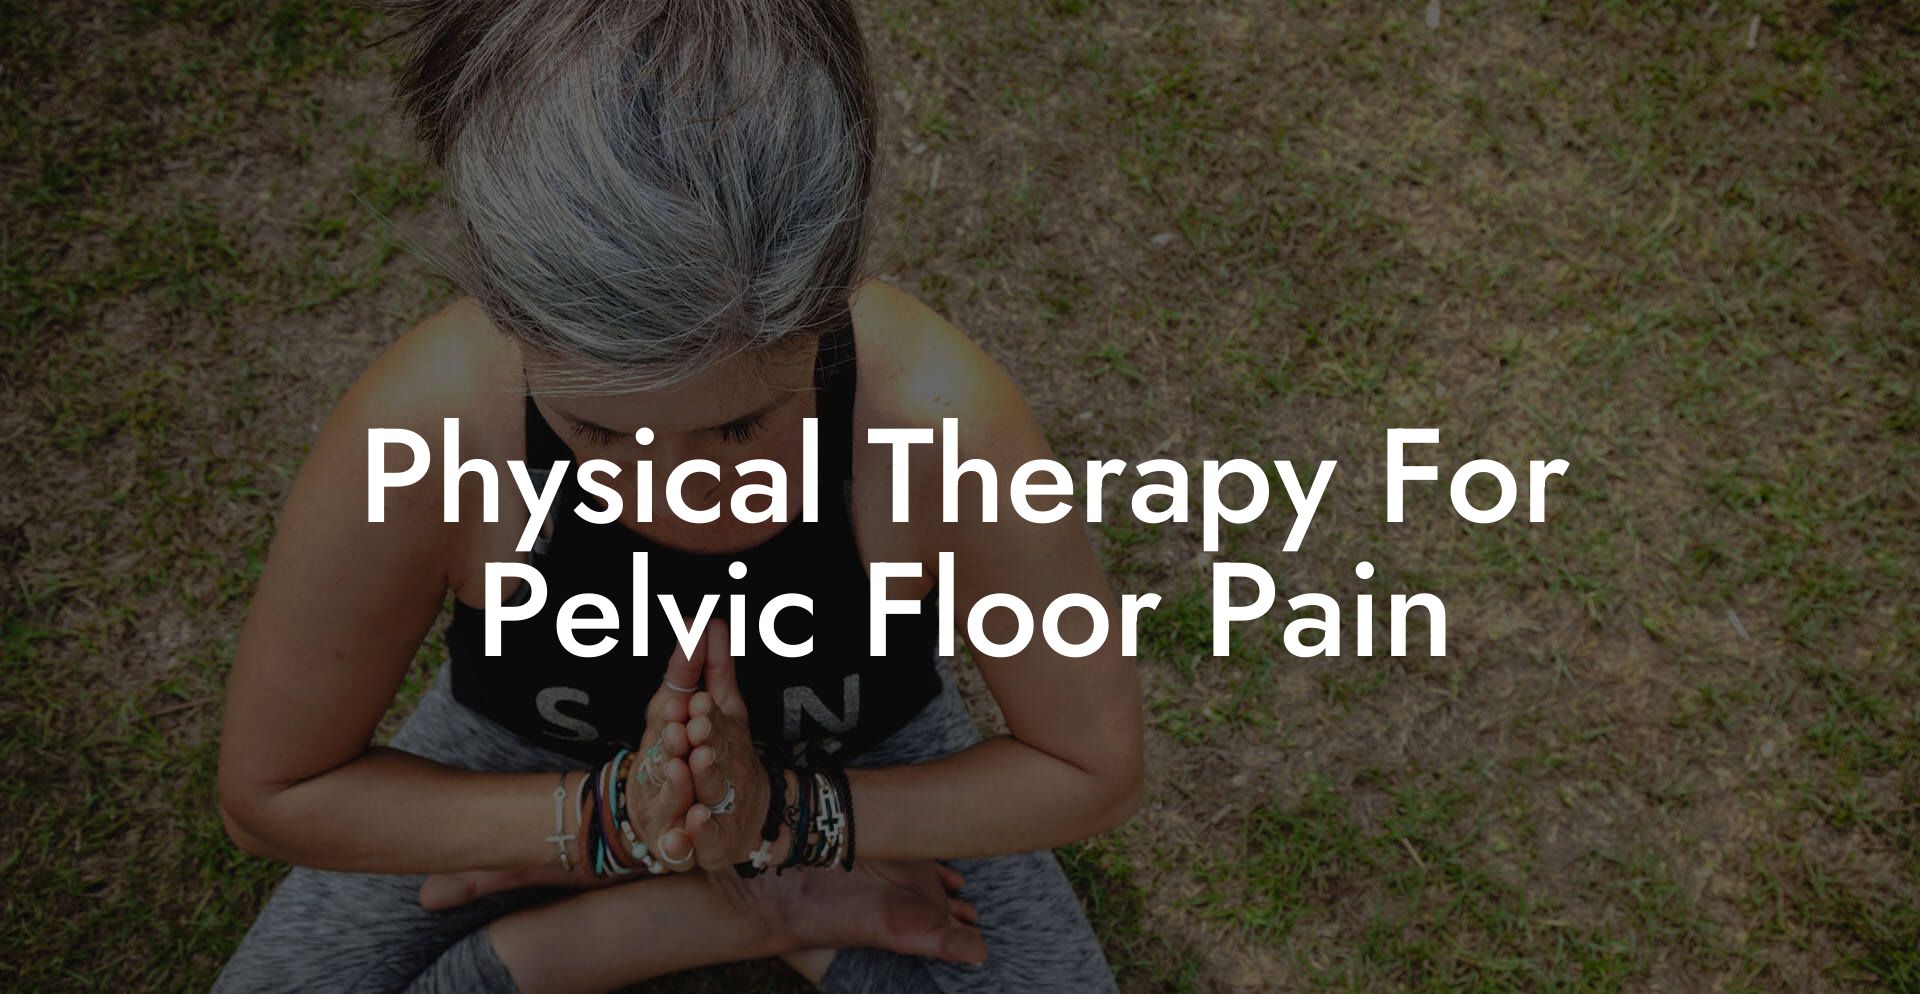 Physical Therapy For Pelvic Floor Pain